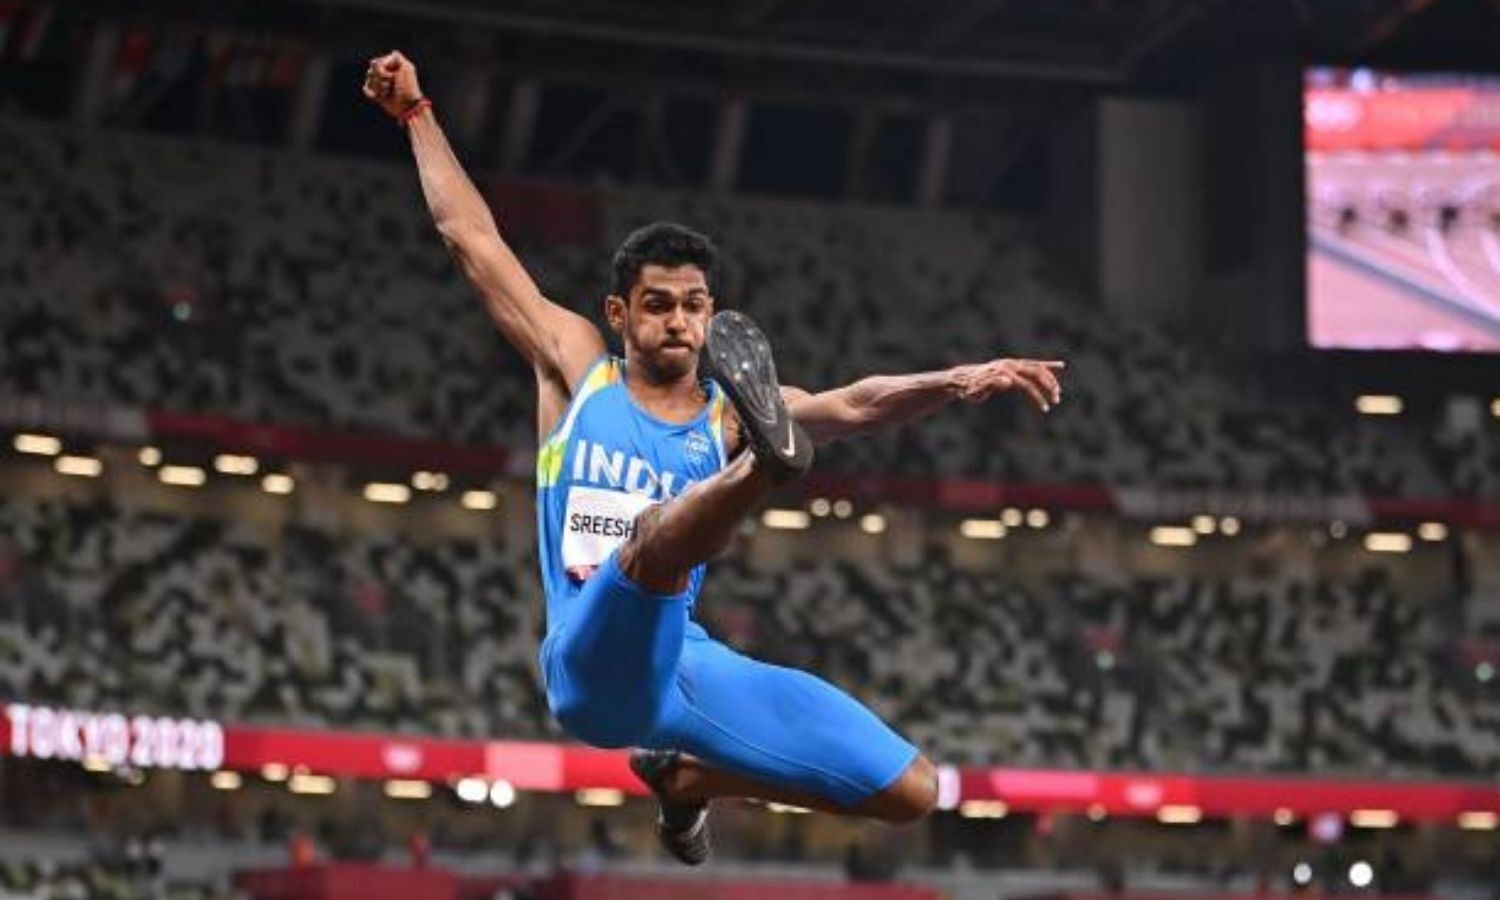 High priority sport with improved fitness and technique — How India is ushering in a new long jump era